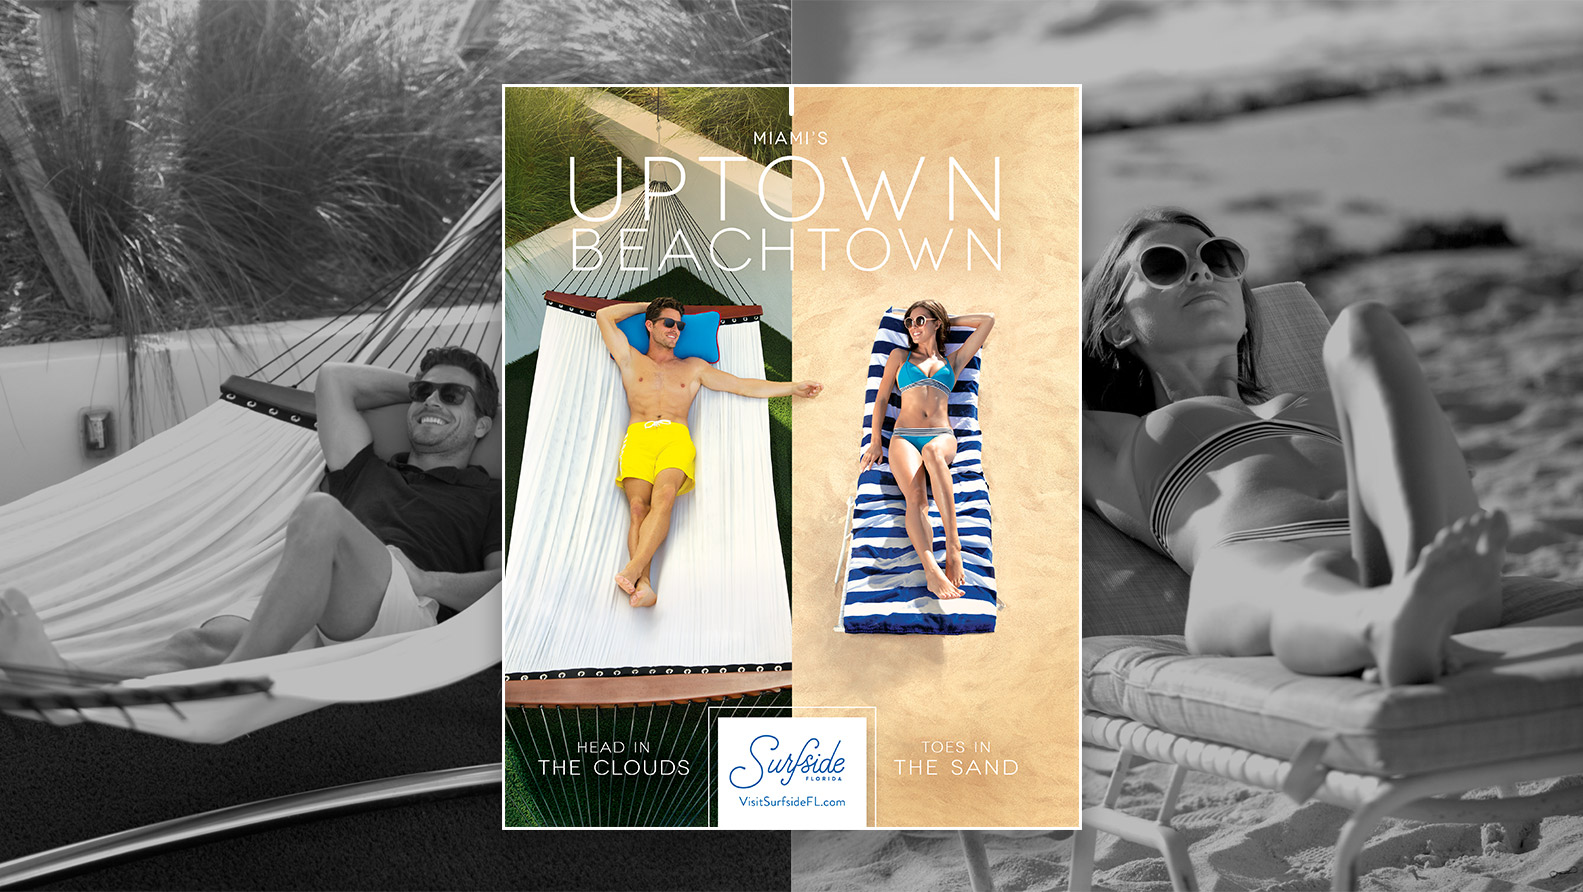 Jacober Creative Identity and Campaign for the Town of Surfside Florida - Photo of "Uptown Beachtown" magazine ad. Man on the left is laying in a hammock, woman on the right is laying on a beach chair